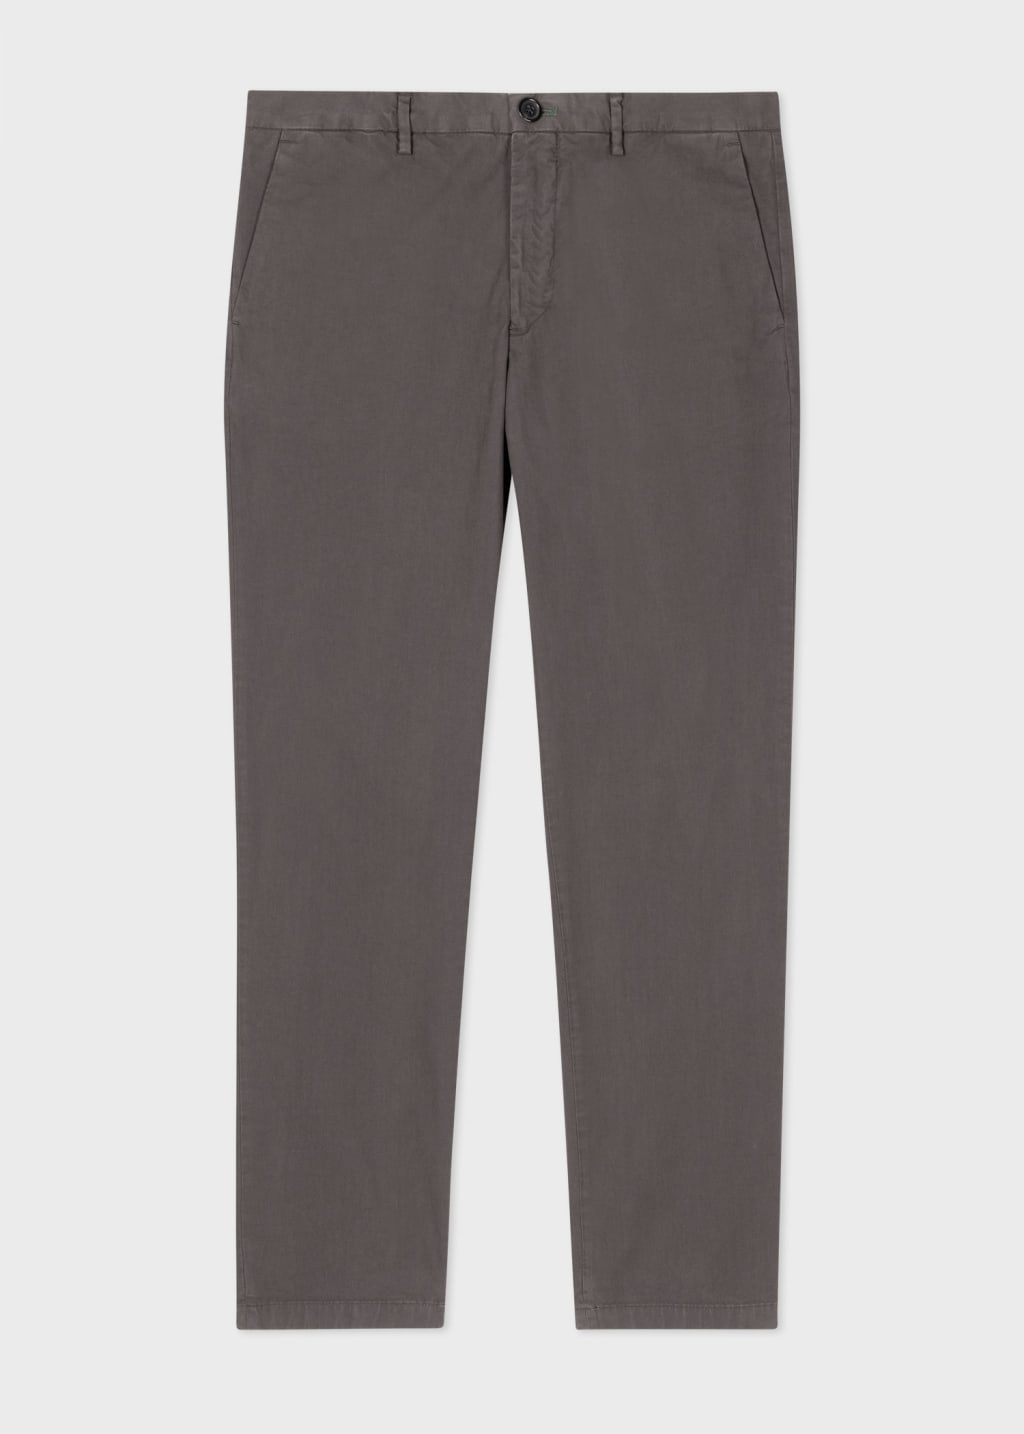 Front View - Charcoal Grey Mid-Fit 'Broad Stripe Zebra' Chinos Paul Smith